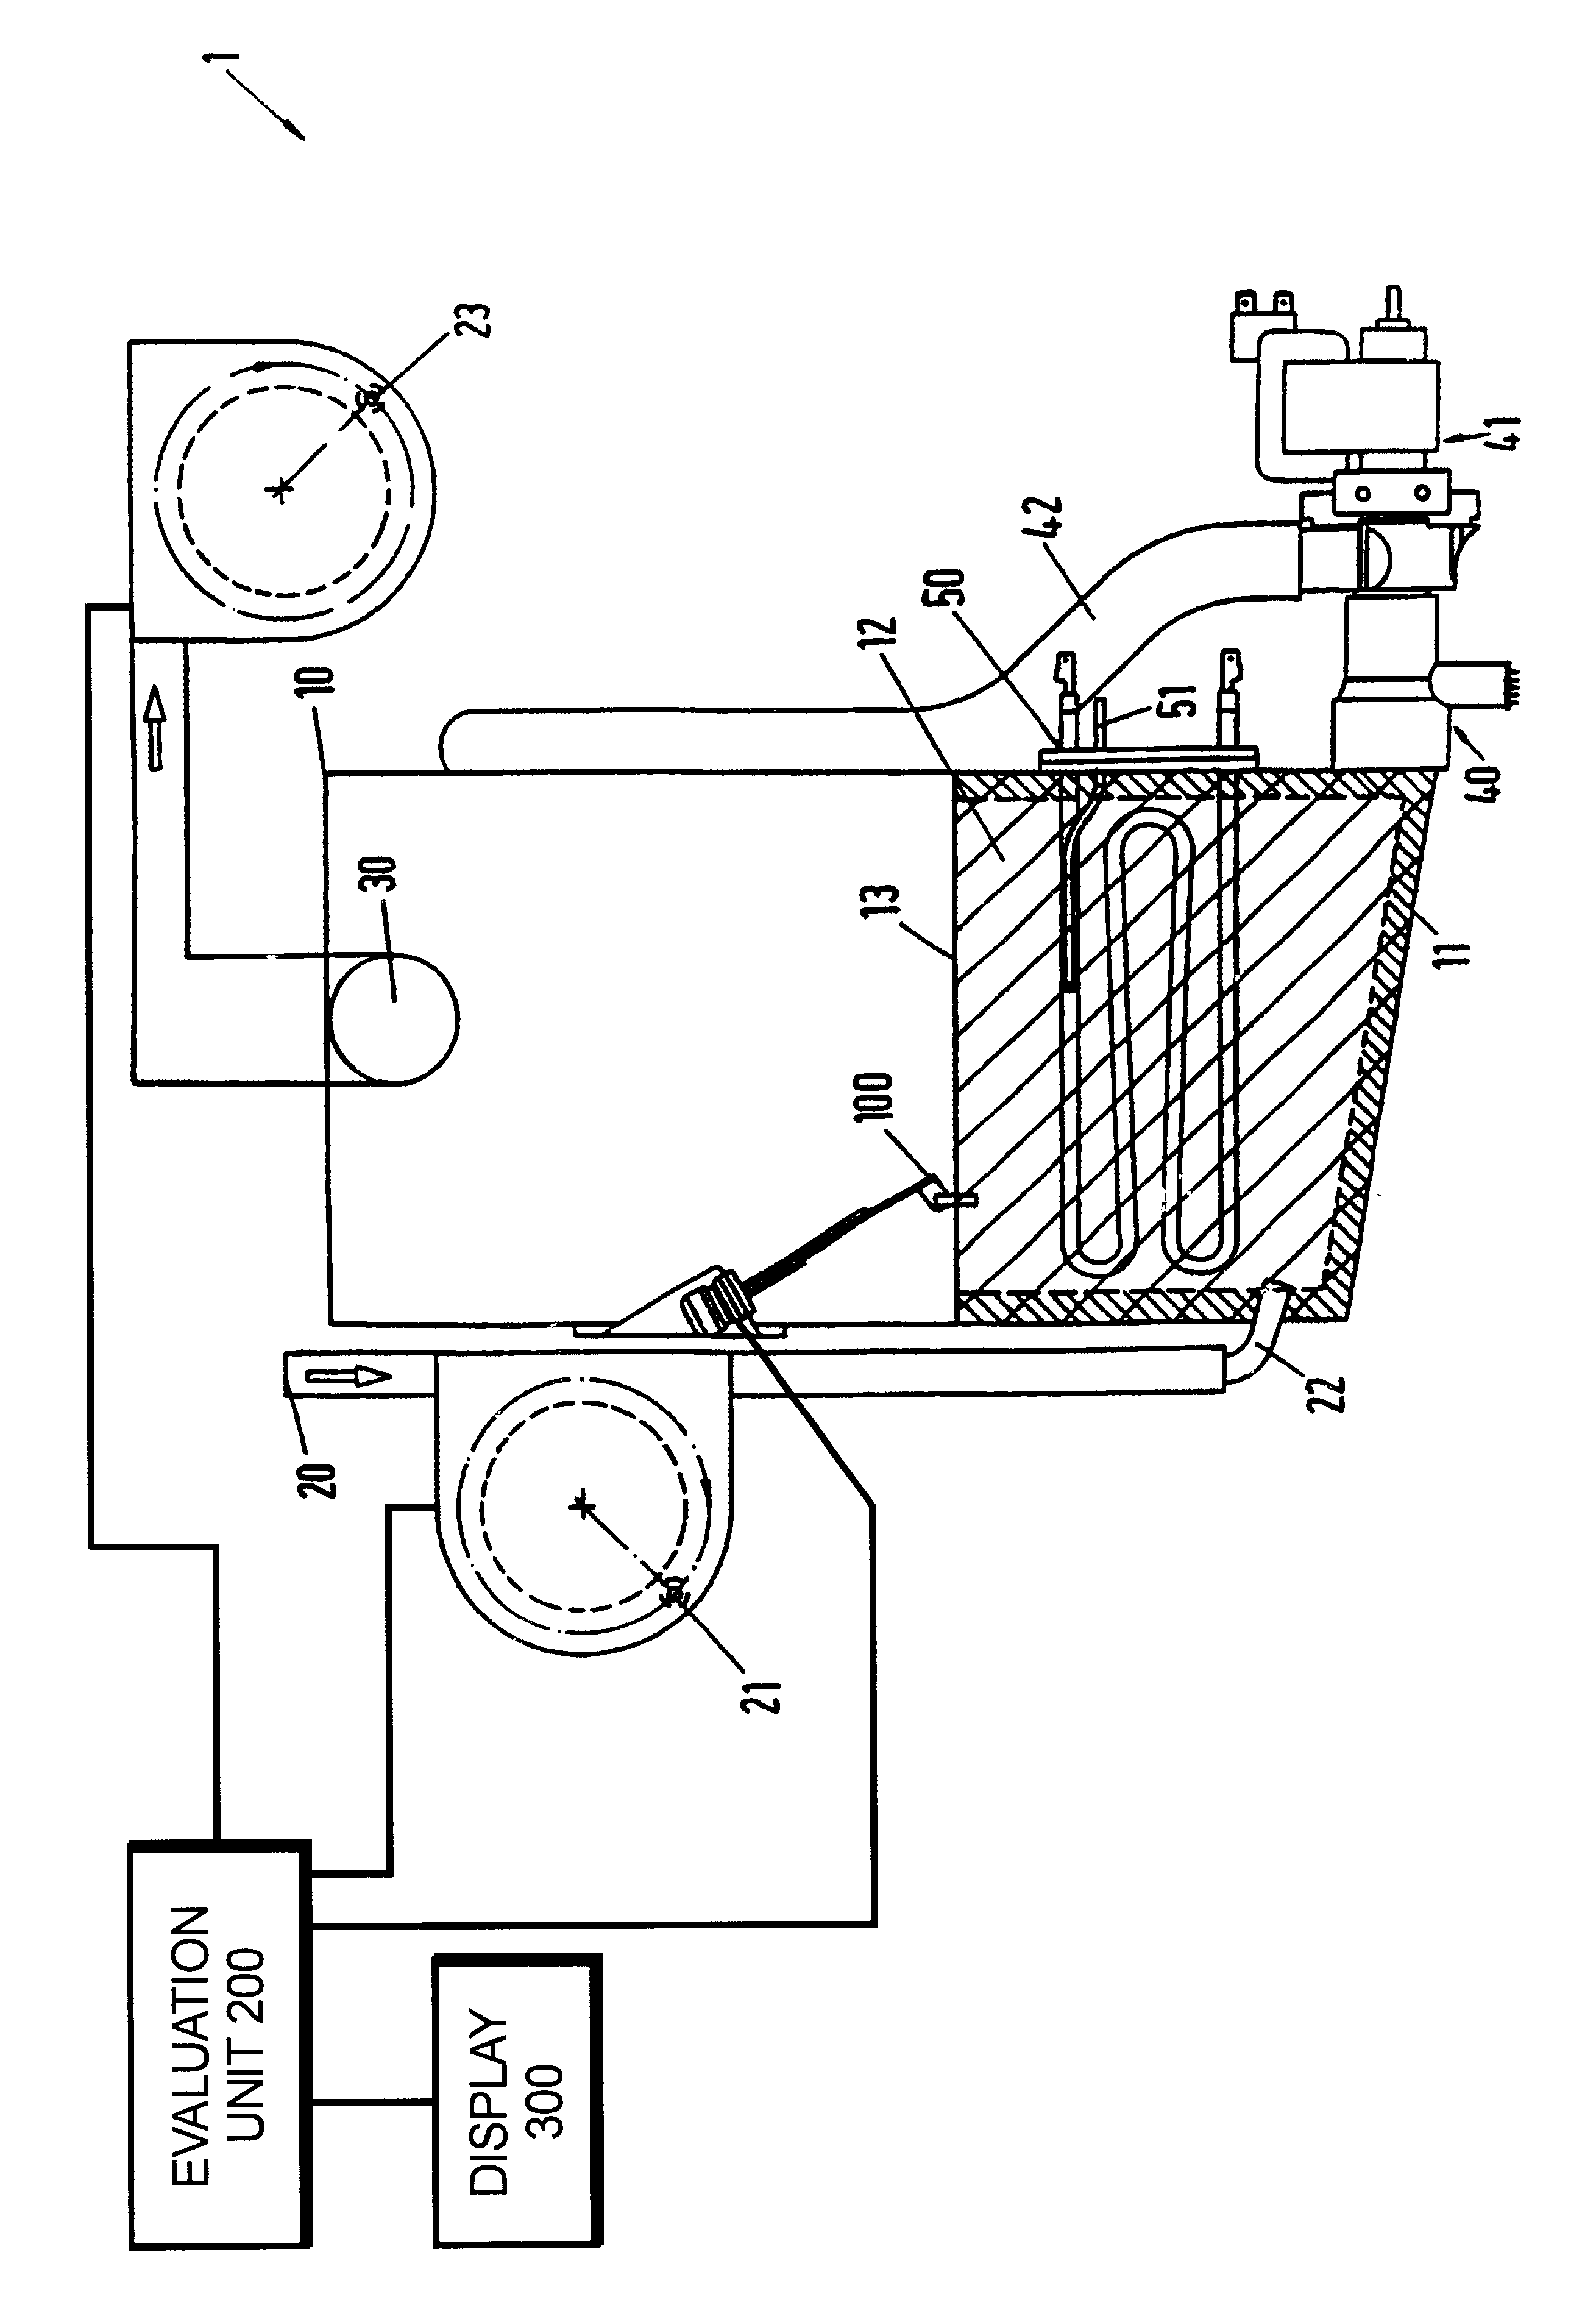 System for electronically monitoring scaling in an apparatus for heating and/or evaporating a liquid